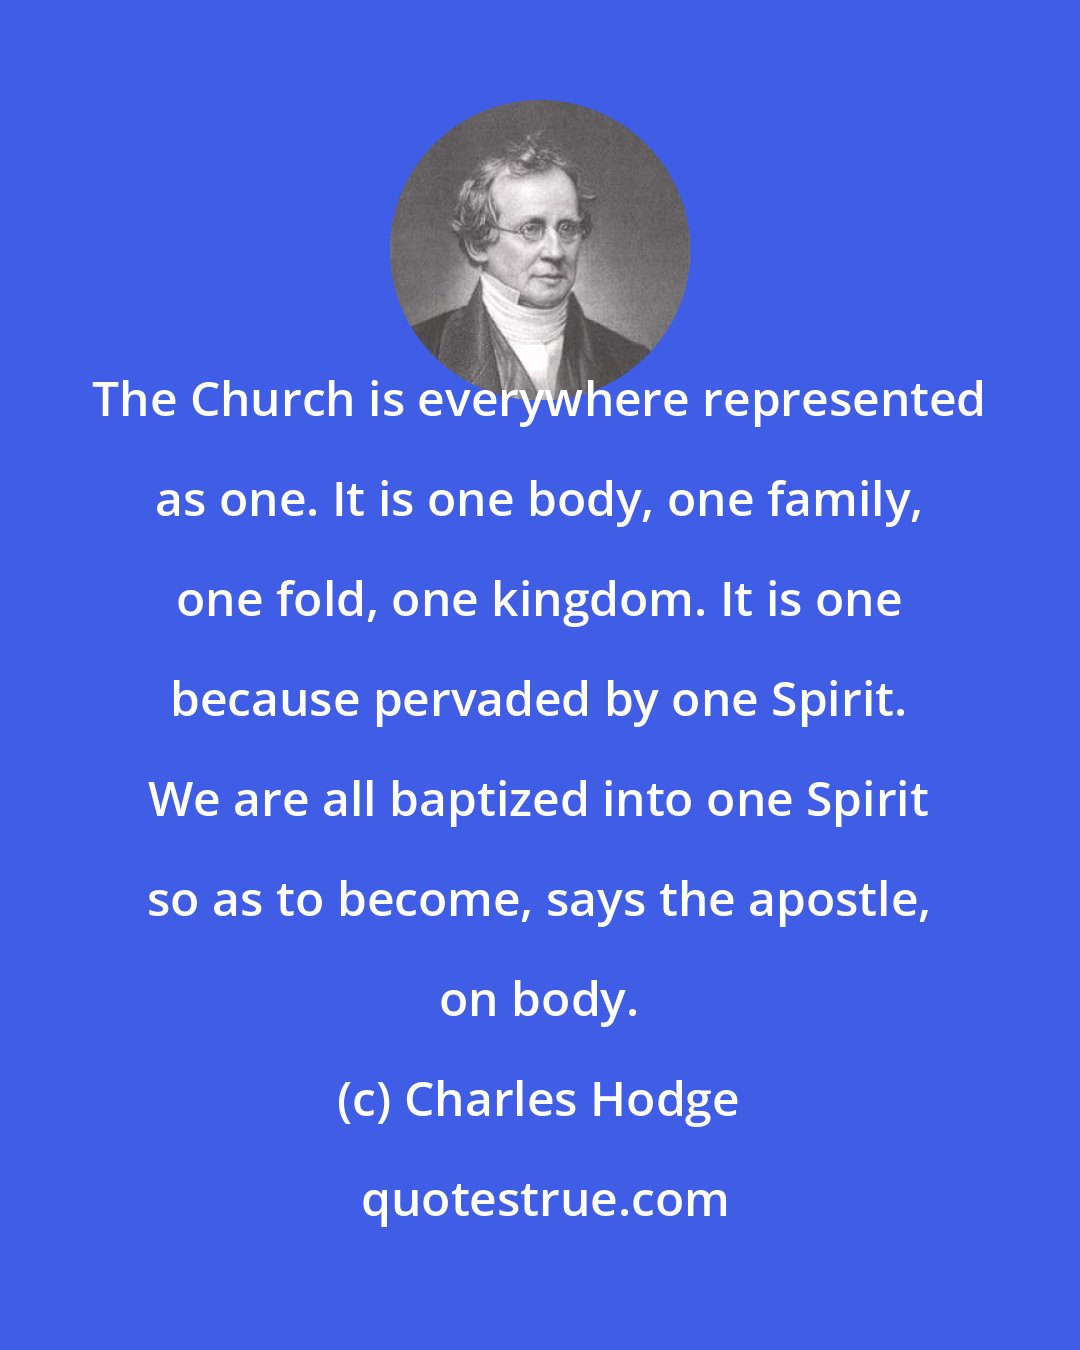 Charles Hodge: The Church is everywhere represented as one. It is one body, one family, one fold, one kingdom. It is one because pervaded by one Spirit. We are all baptized into one Spirit so as to become, says the apostle, on body.